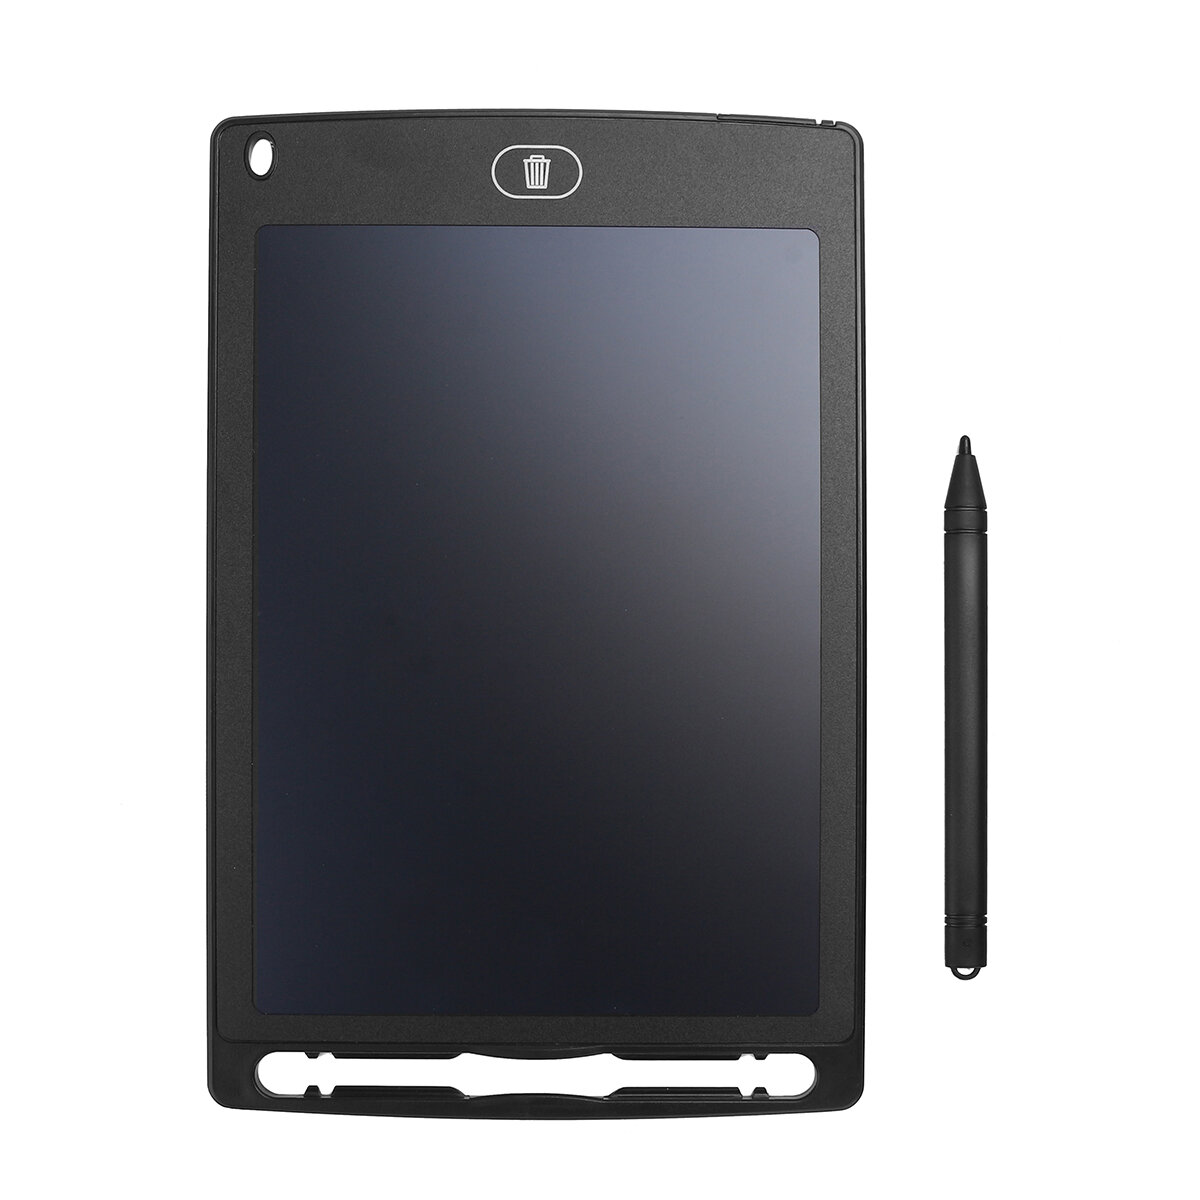 US$14.41  8.5Inch Electronic Digital LCD Writing Pad Tablet Drawing Graphics Board Notepad With Stylus Pen  Office & School Supplies from Computer & Networking on banggood.com